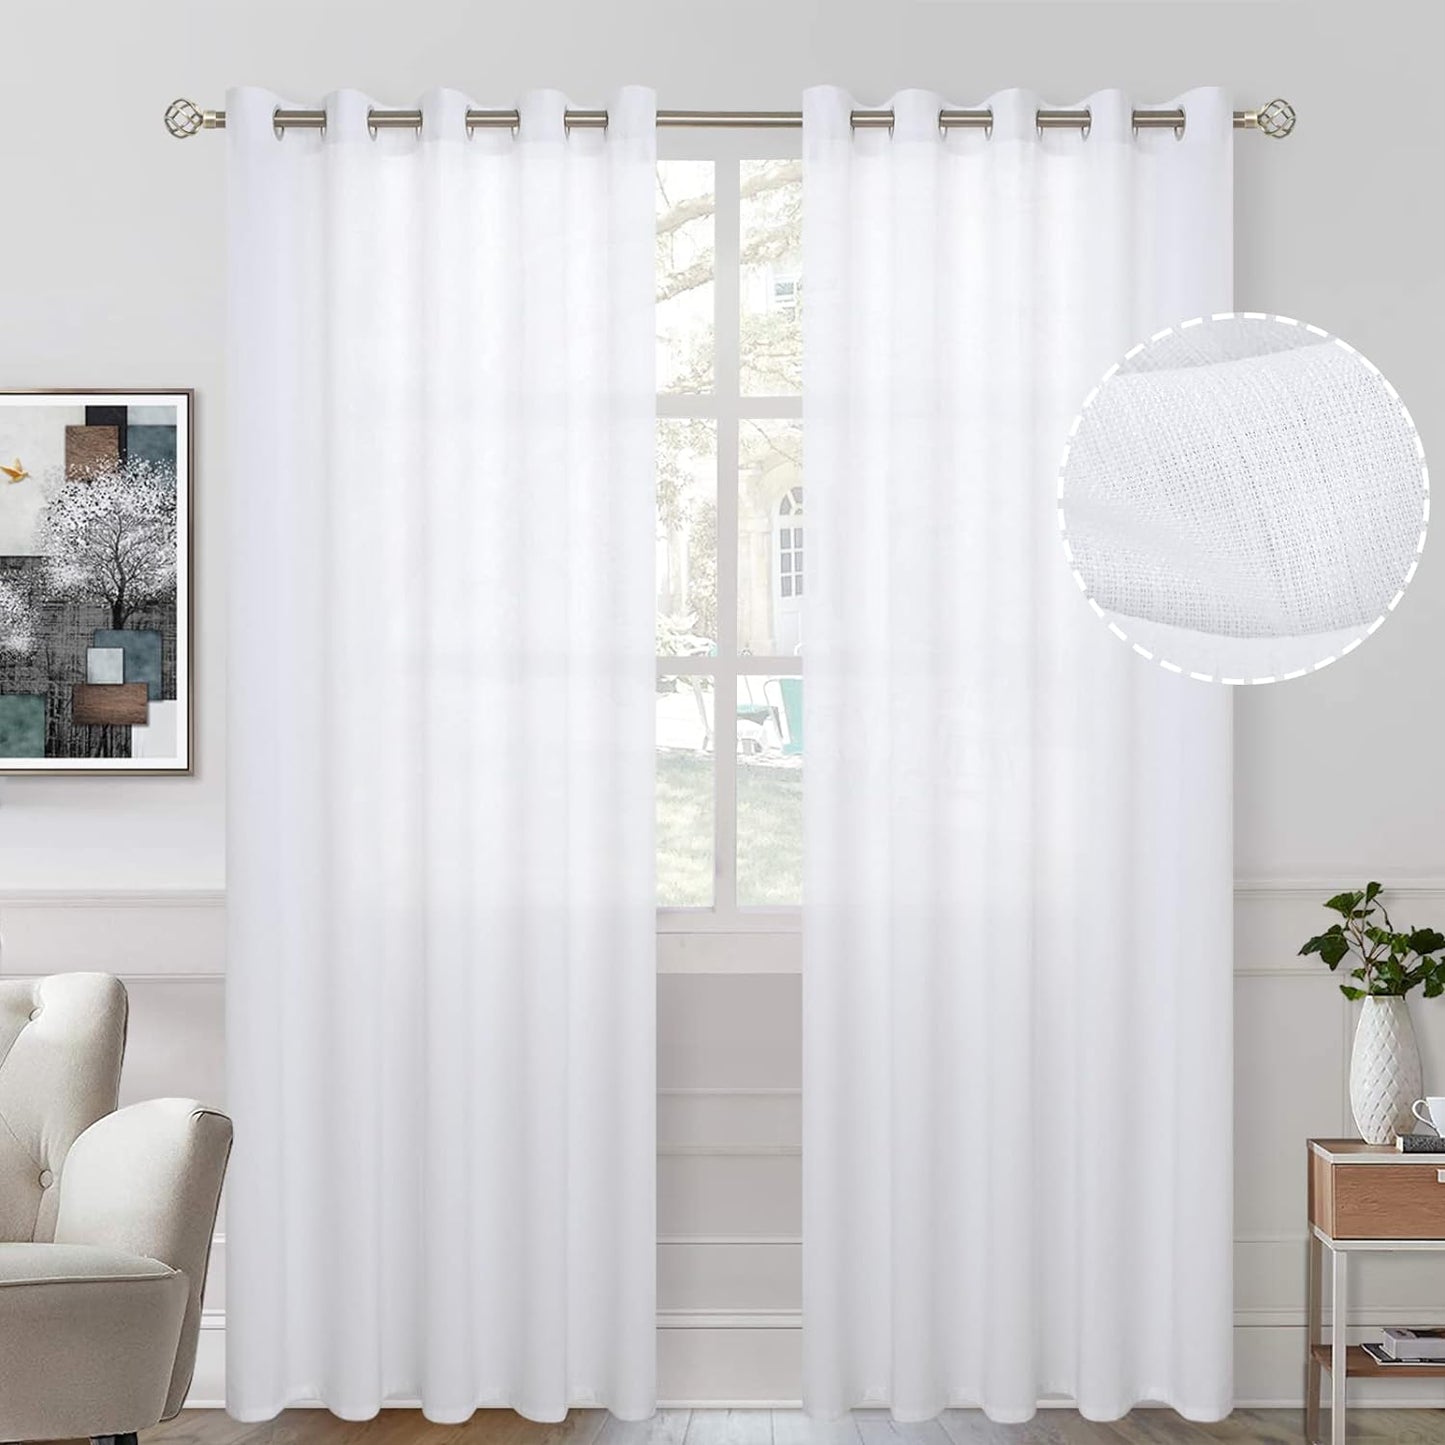 Bgment Natural Linen Look Semi Sheer Curtains for Bedroom, 52 X 54 Inch White Grommet Light Filtering Casual Textured Privacy Curtains for Bay Window, 2 Panels  BGment White 60Wx95L 